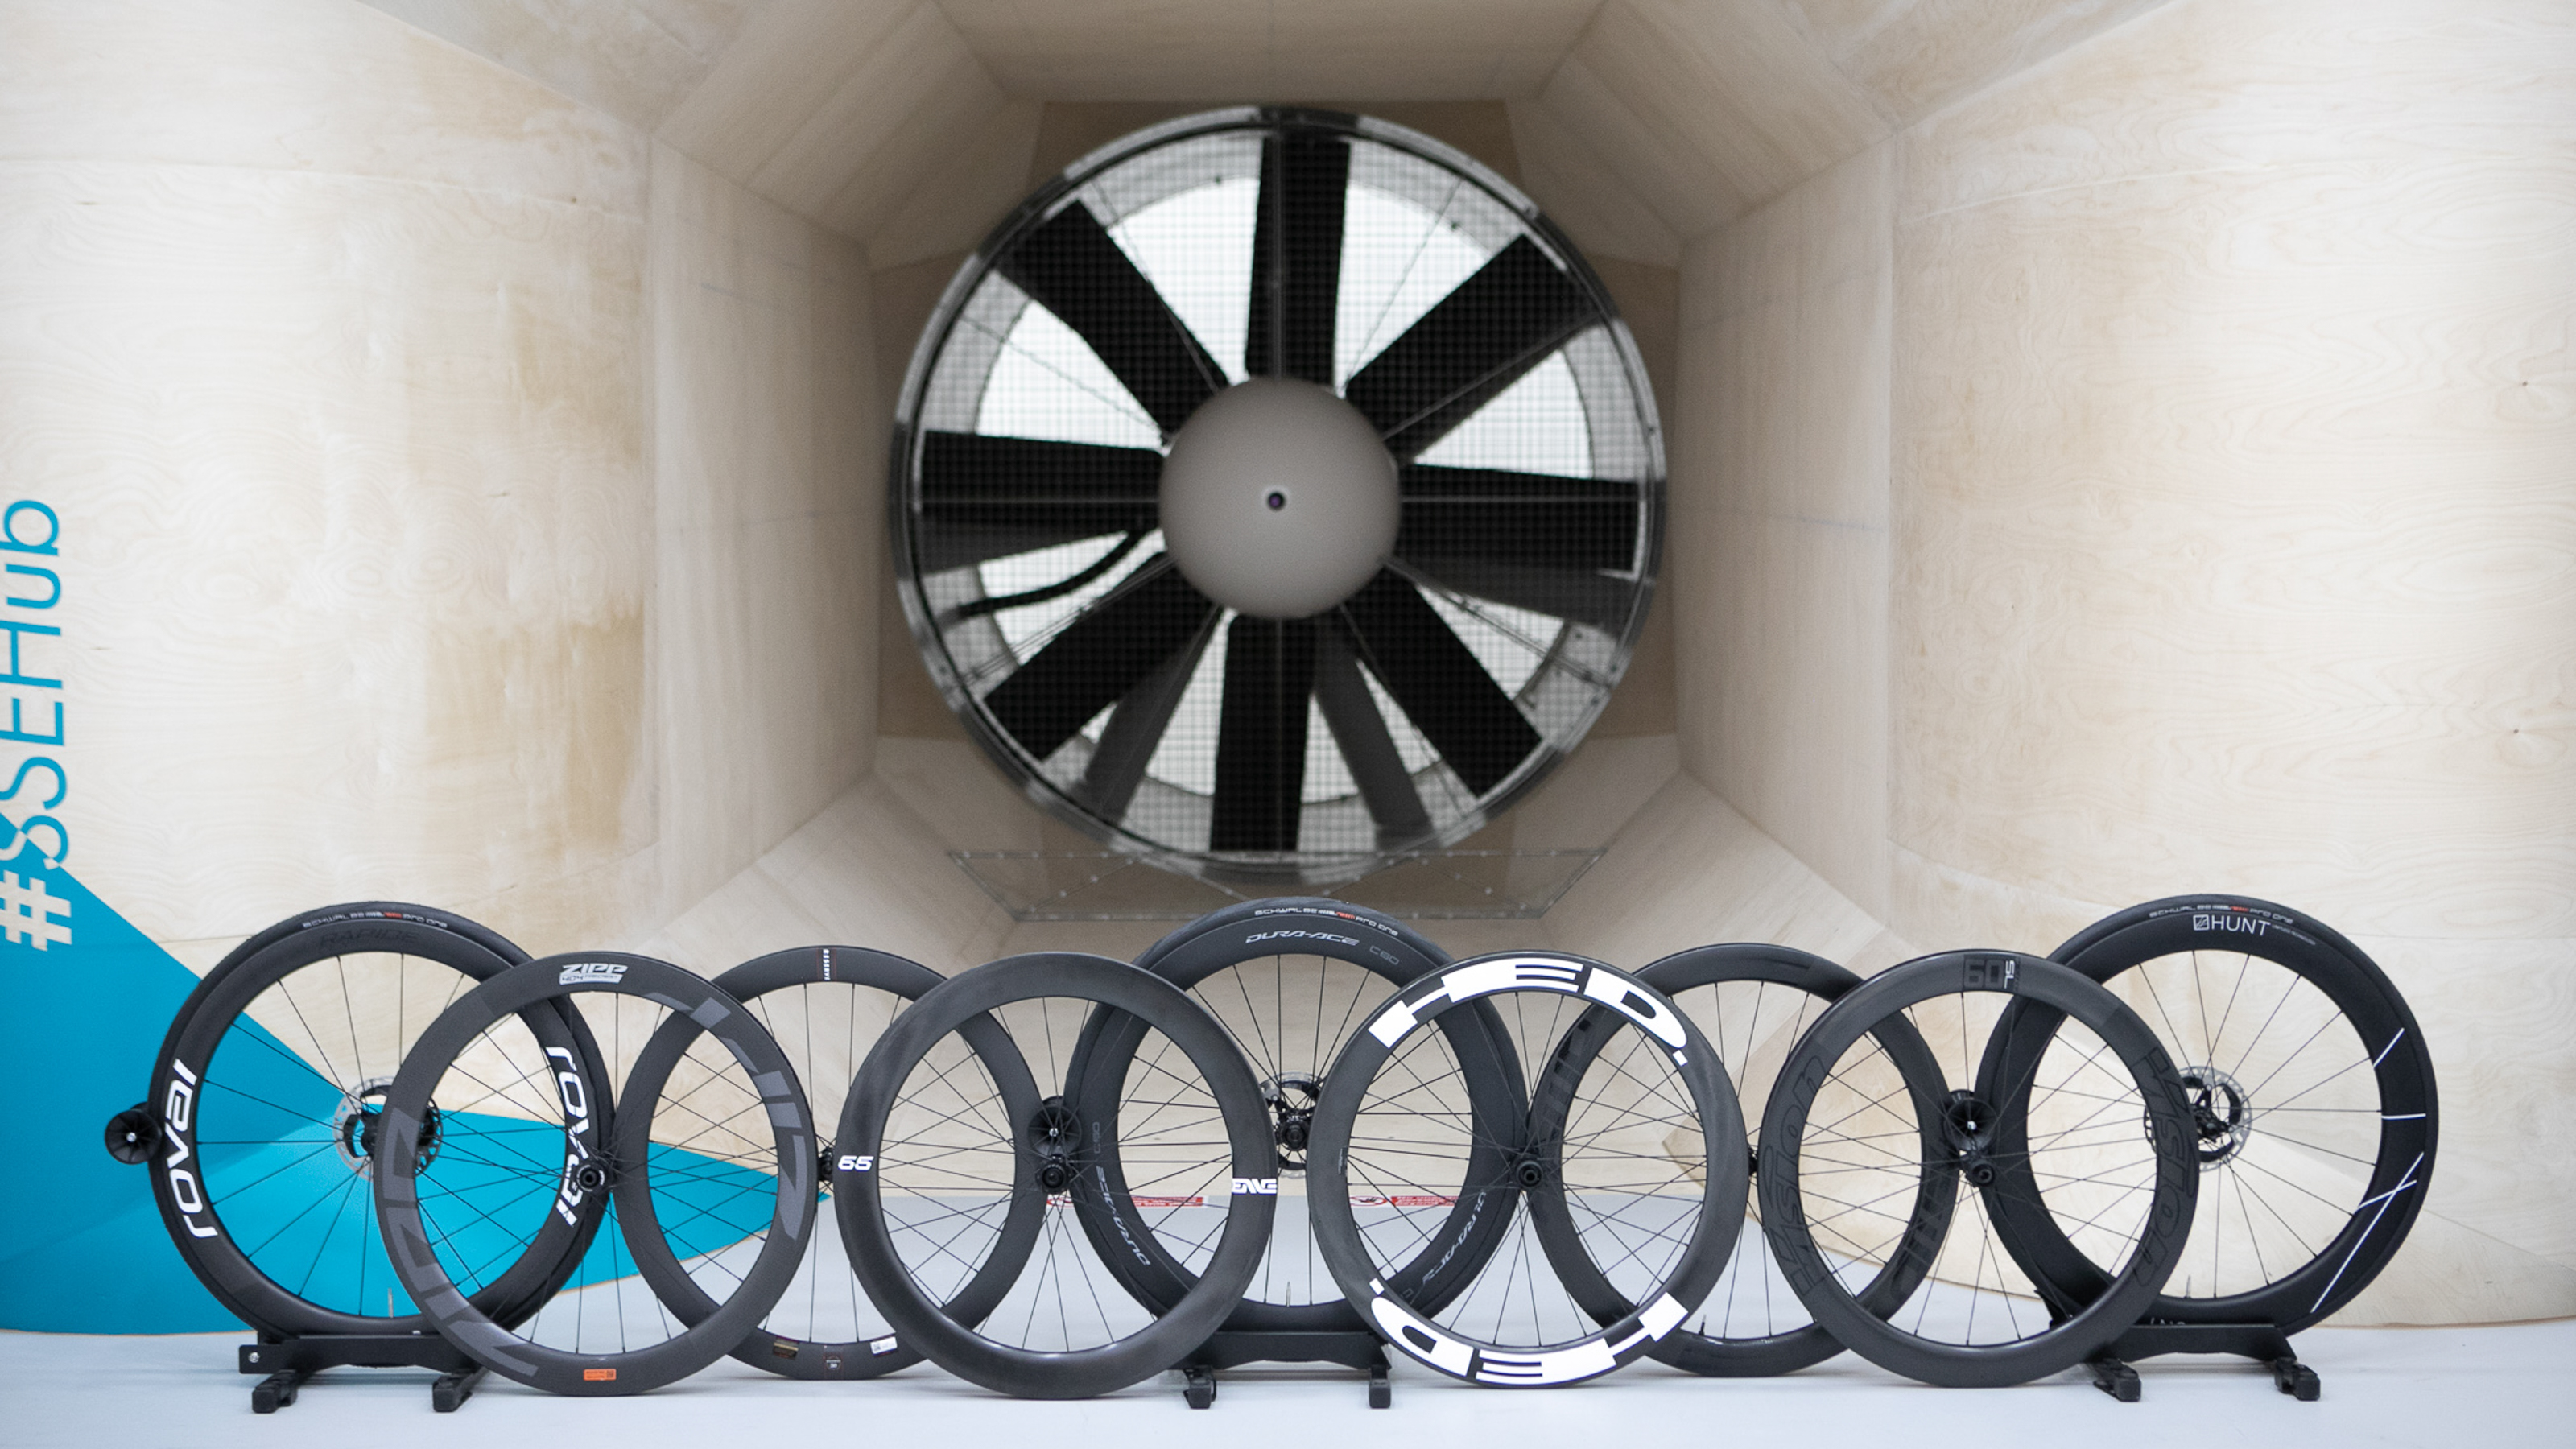 Wind tunnel tested: Which aero road wheels are the fastest?